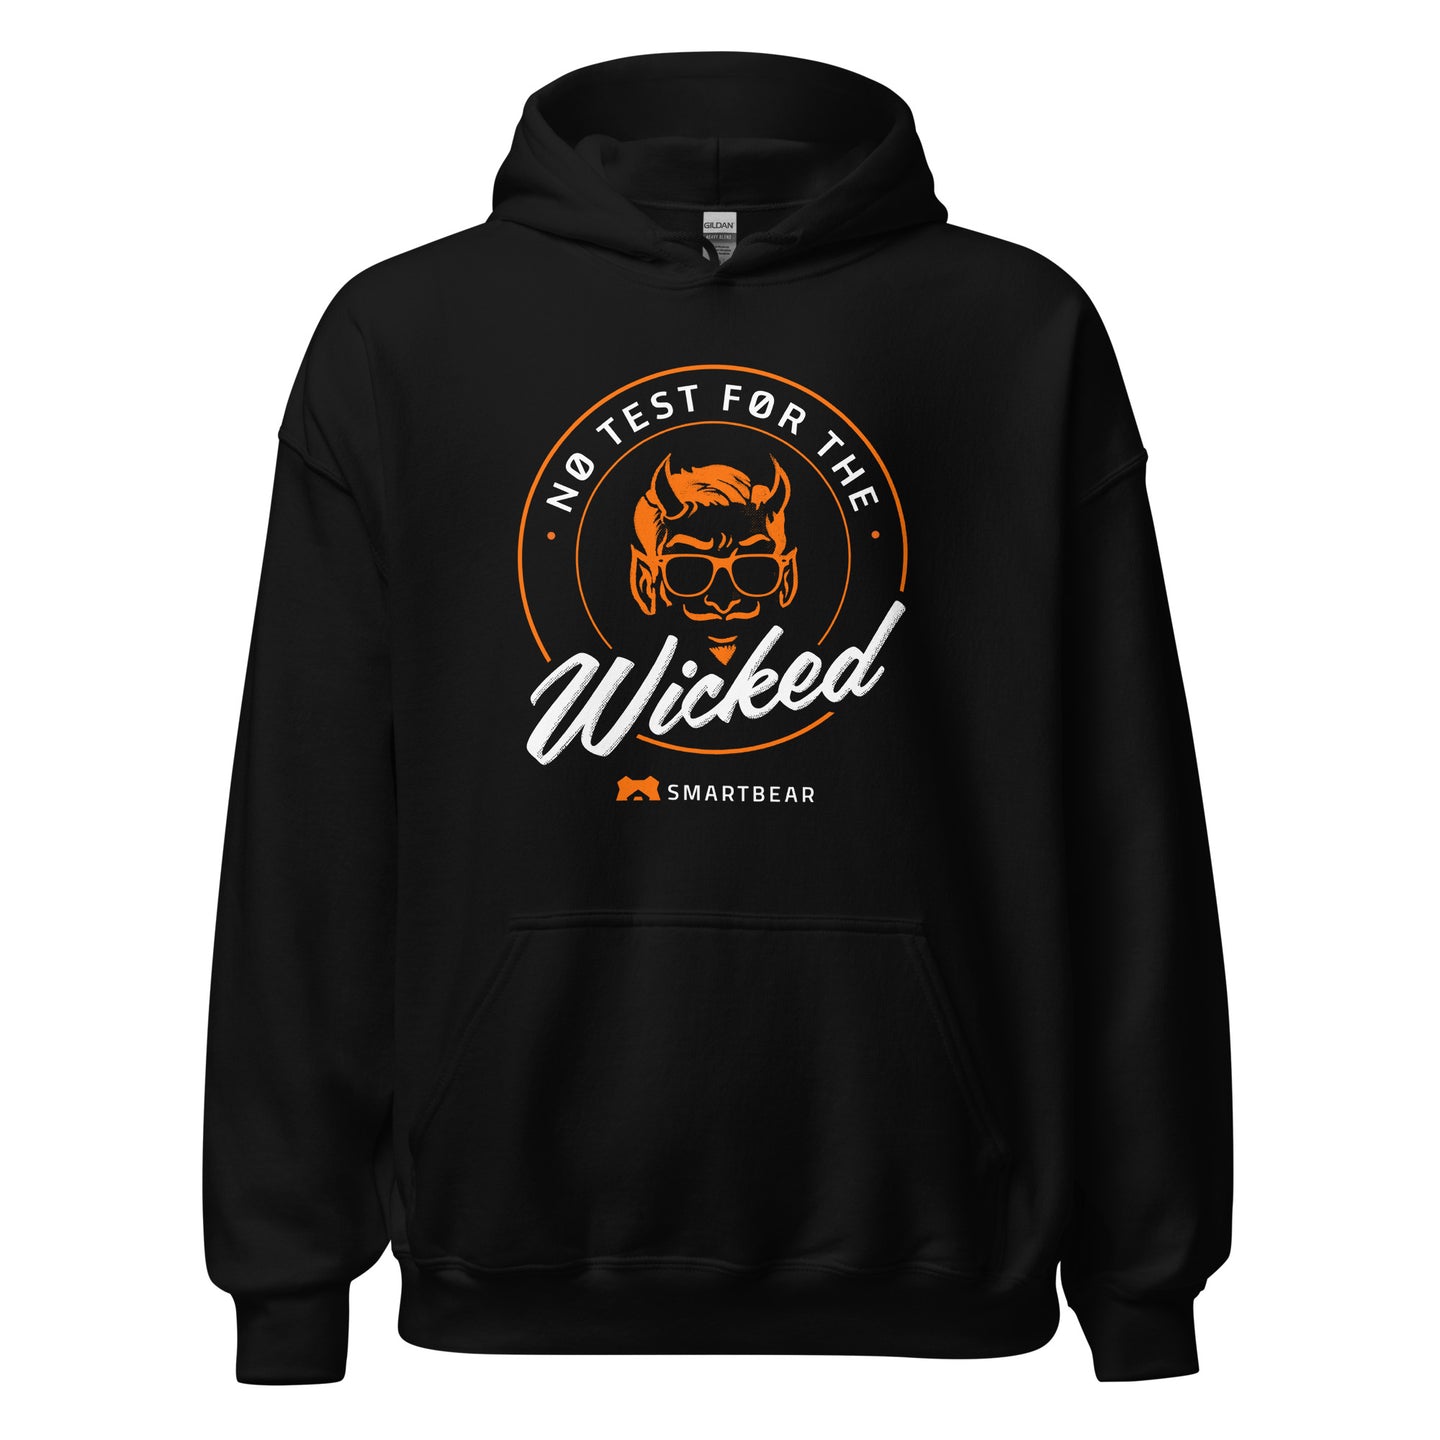 No Test for the Wicked Hoodie